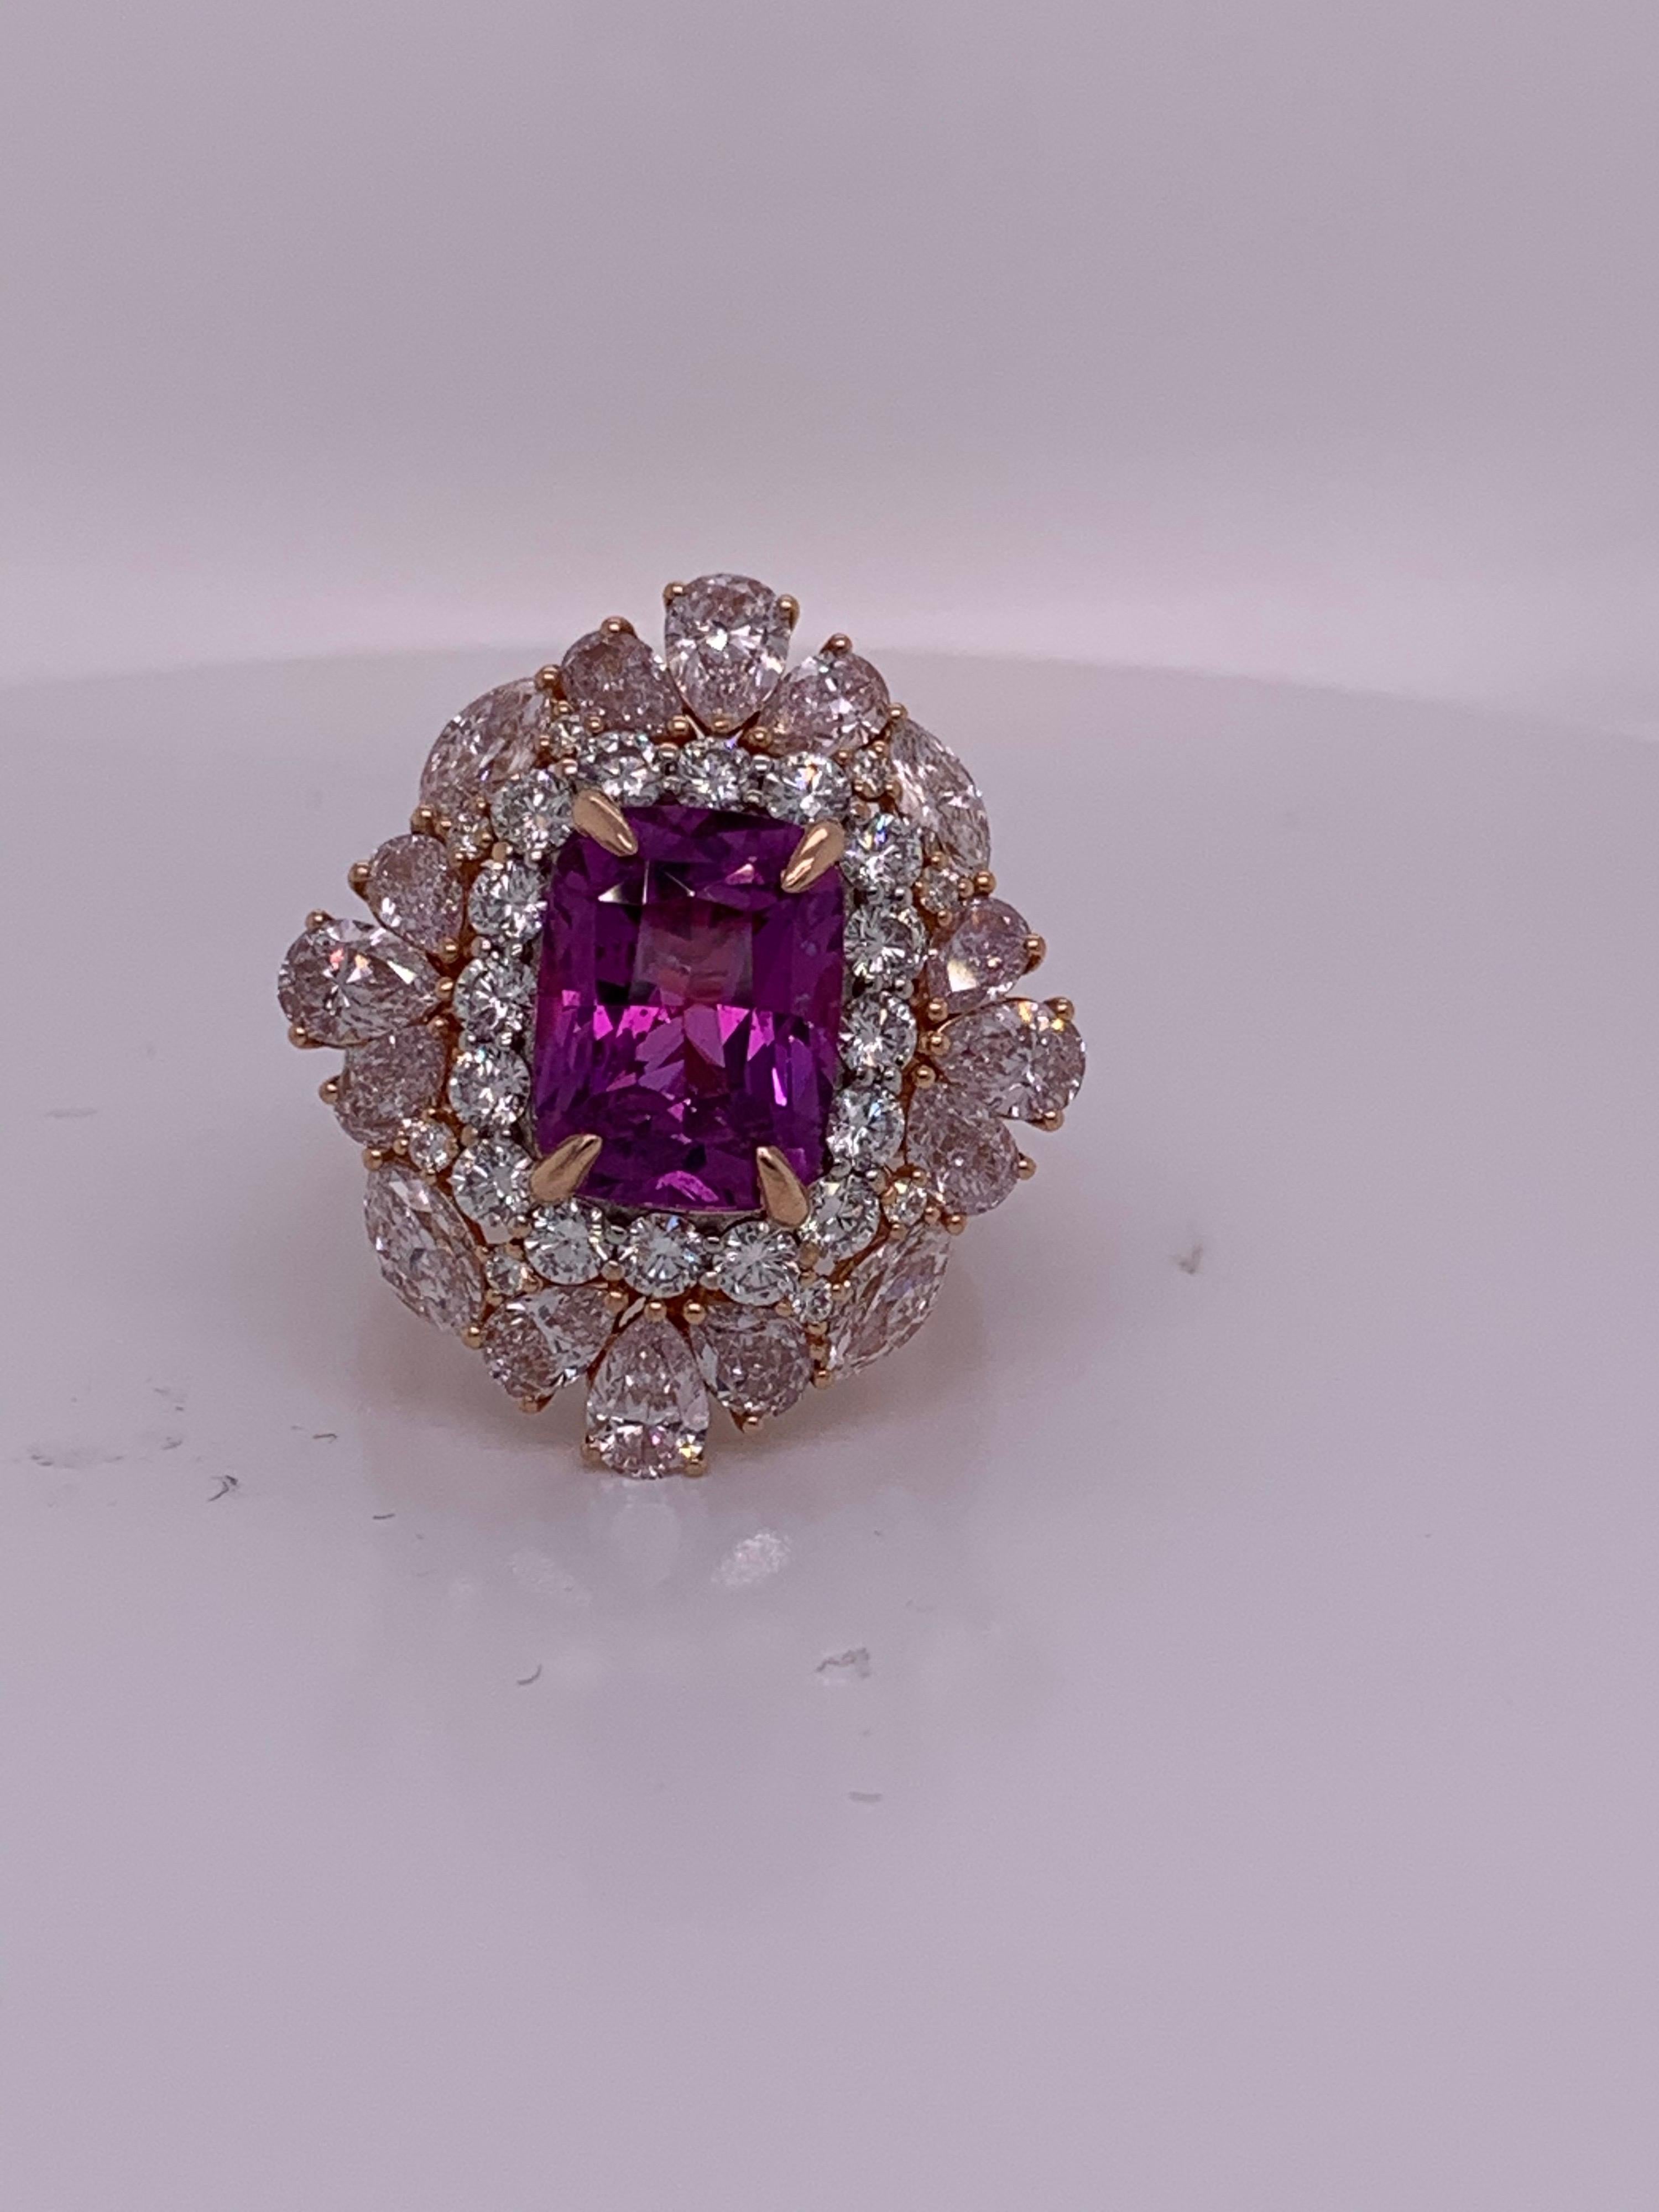 Natural,no heat, purple sapphire is a coveted gem stone. This magnificent cushion shaped sapphire ring has white diamond halo which is framed by glistening pink diamonds.This delicate and precious ring is finished with hand set in prongs.
Purple